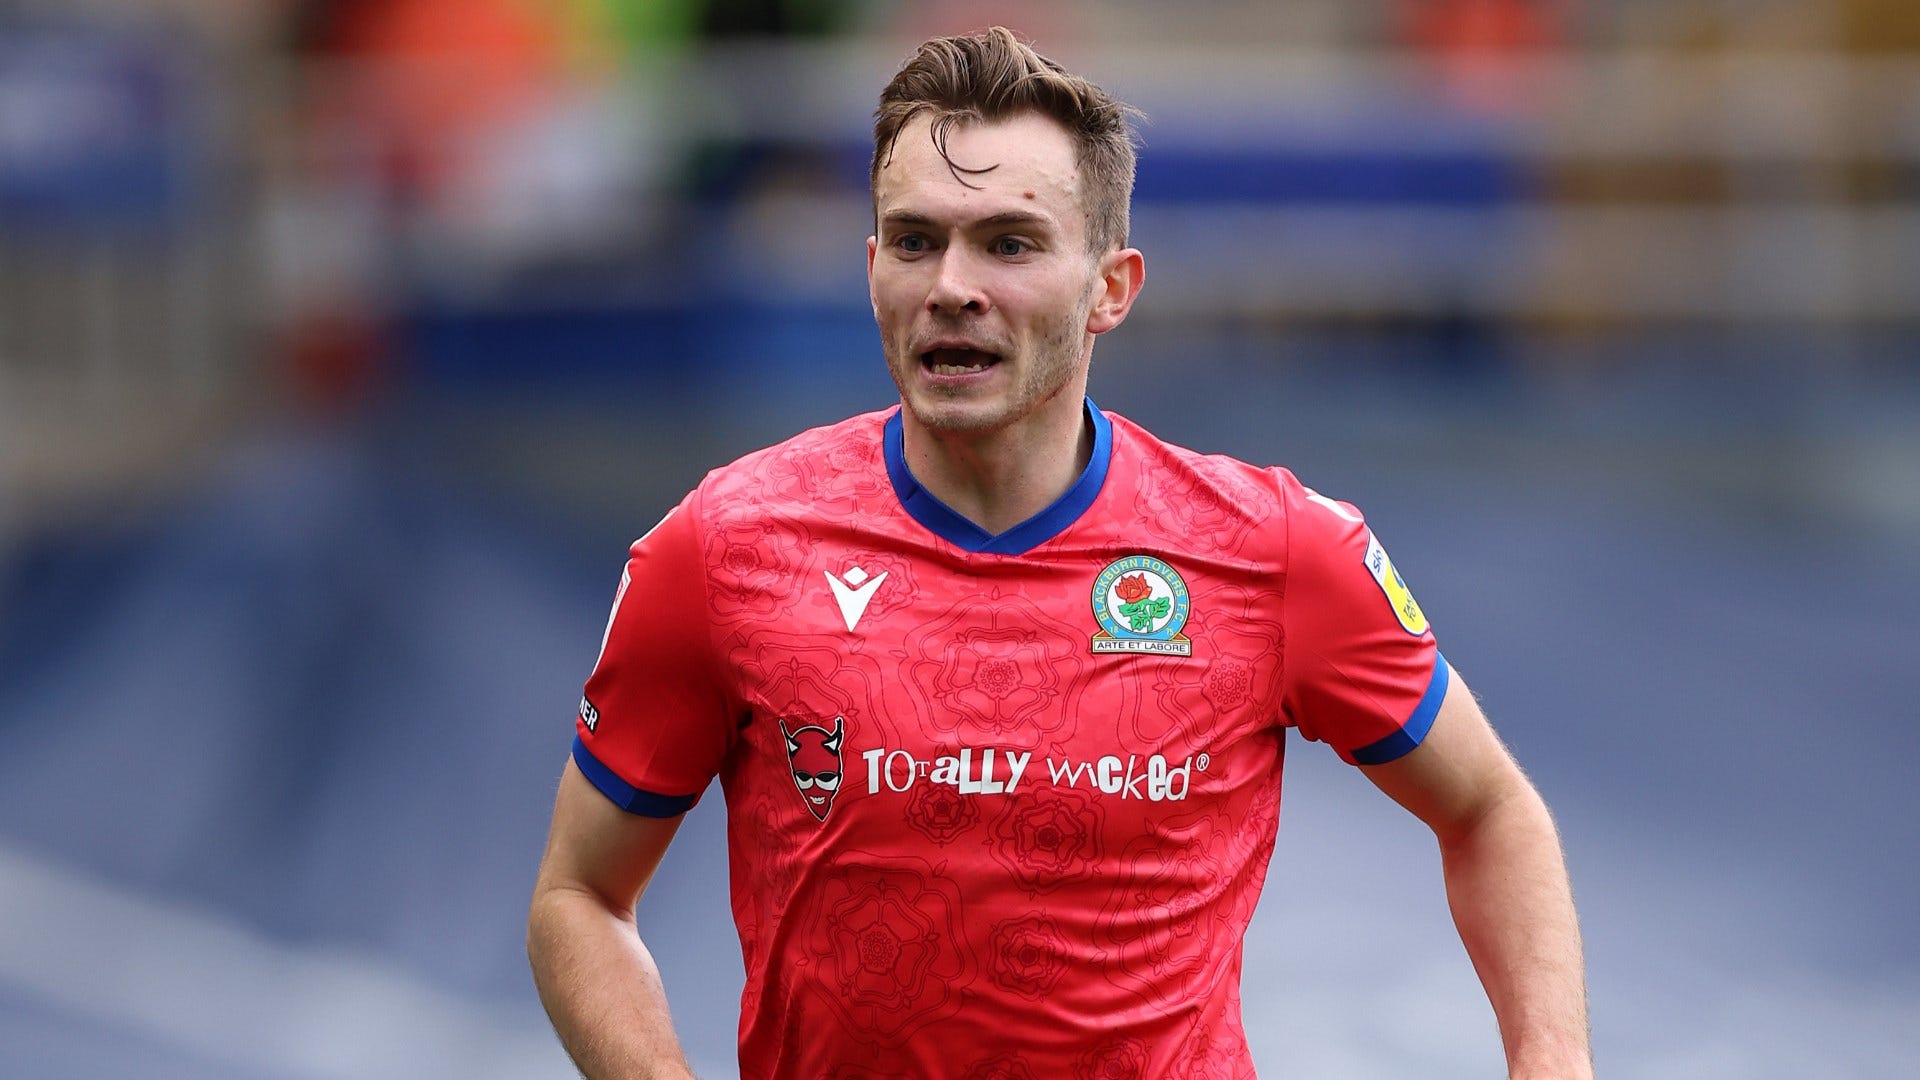 Blackburn Rovers vs Luton Town Where to watch the match online, live stream, TV channels and kick-off time Goal US